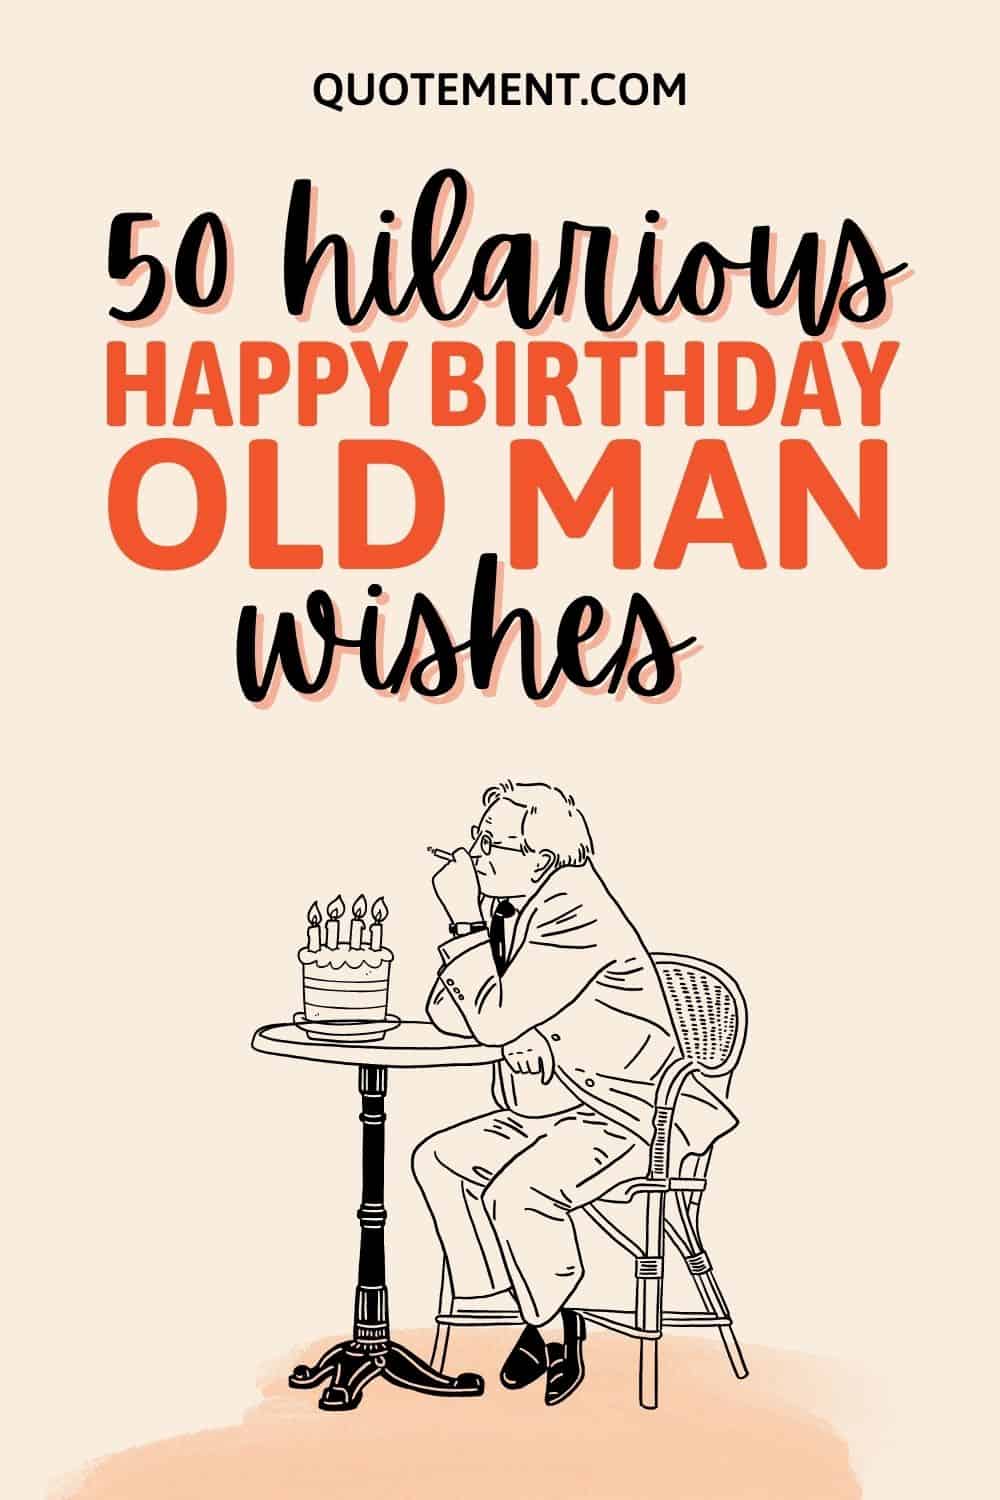 50 Best Happy Birthday Old Man Wishes For Your Loved Ones
